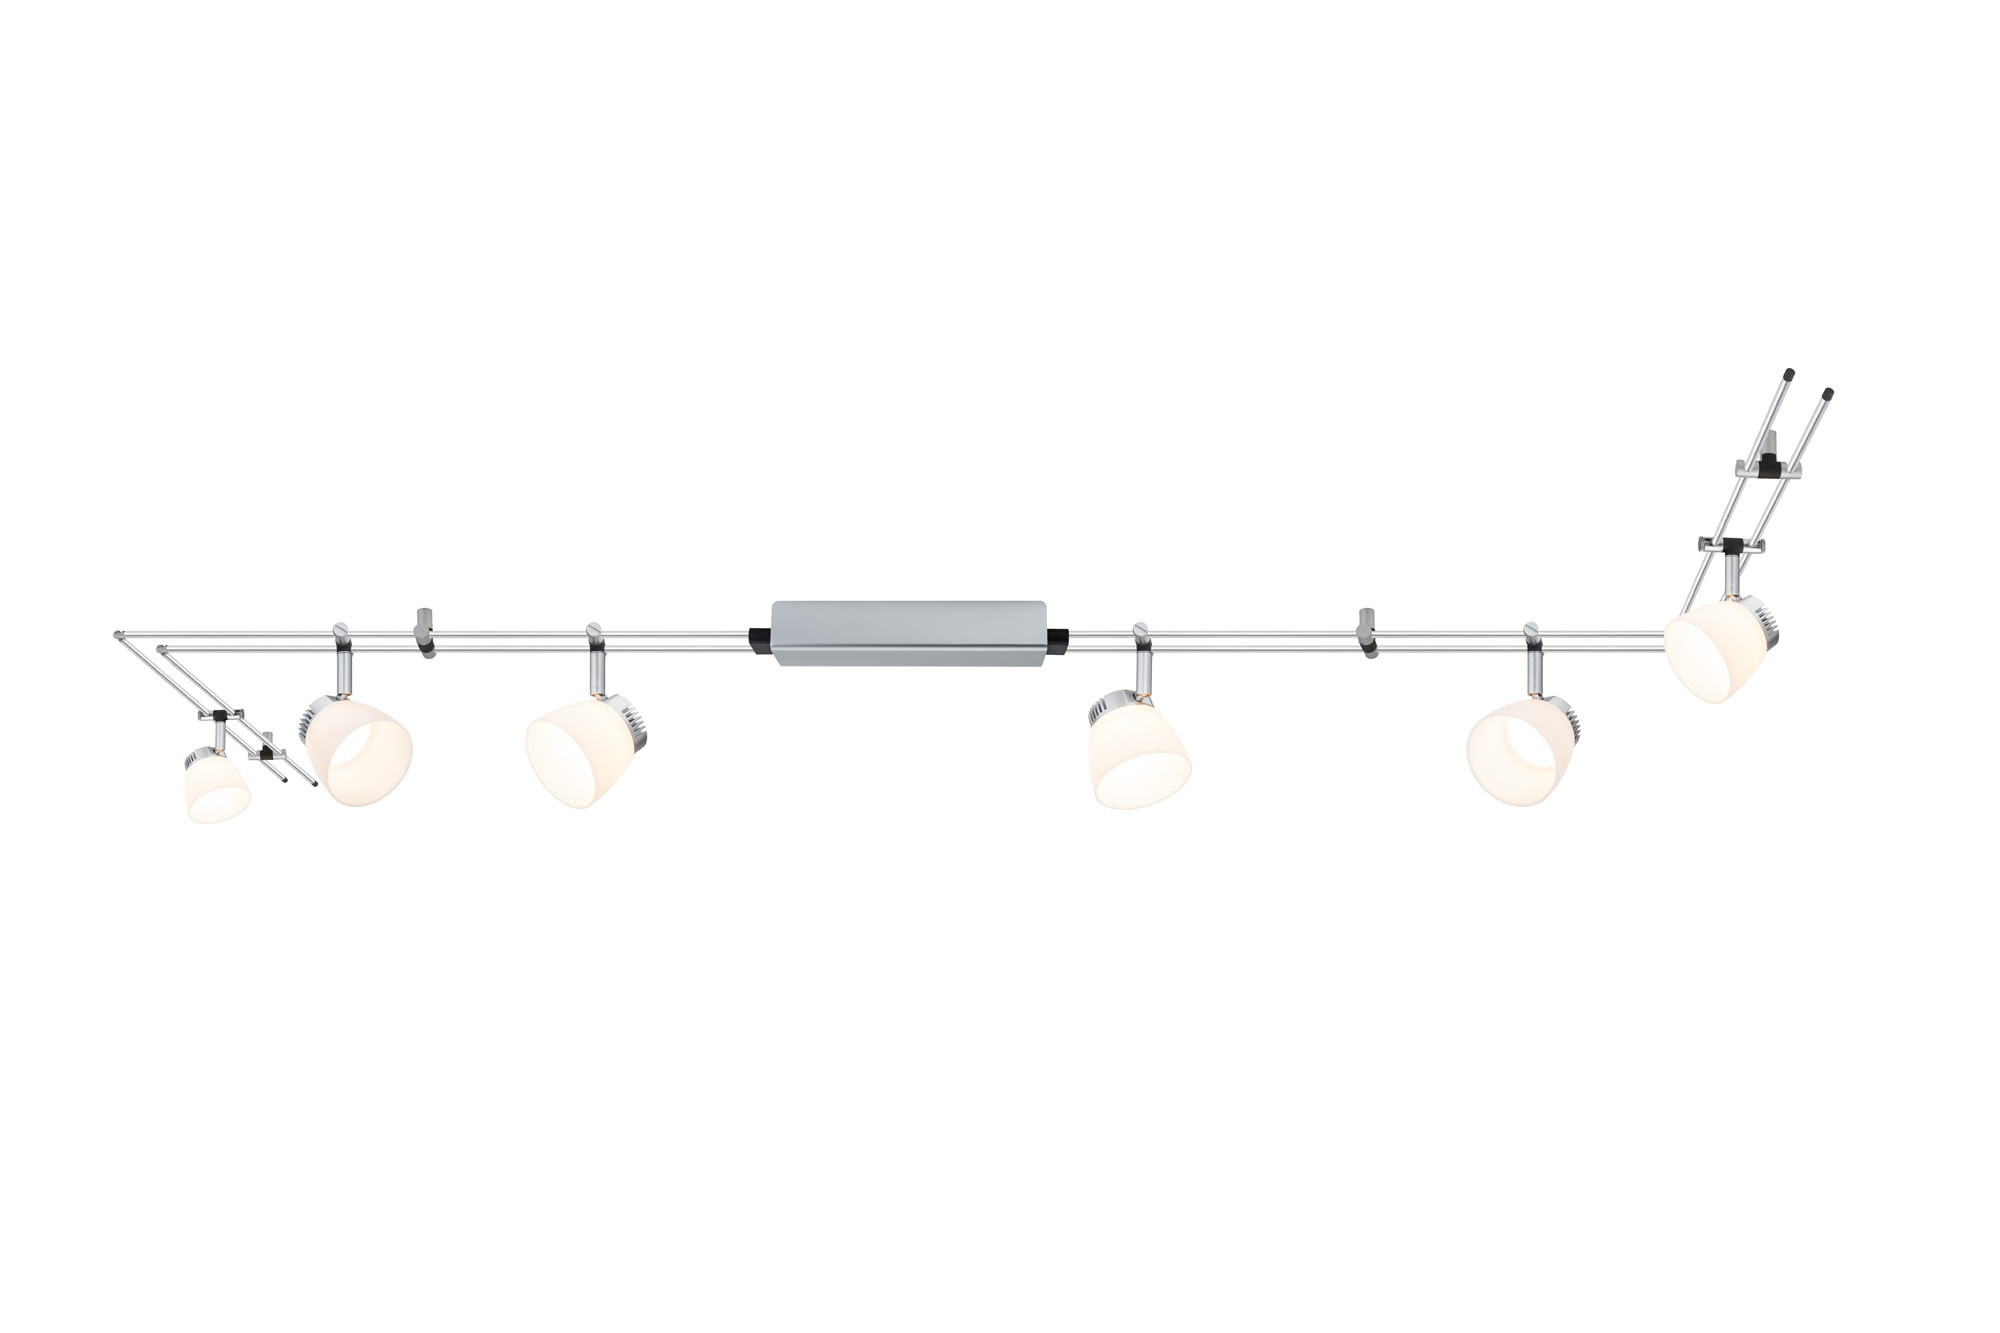 95197 RS DC Set GlassLED II 6x4W Chr-m 30VA IceLED, the 6-lamp 12В volt LED rail system with a total output of 24В W, impresses with its energy-saving 12 volt technology. The brilliant light creates a pleasant atmosphere in any living area. The system is suitable for wall and ceiling mounting. 951.97 Paulmann